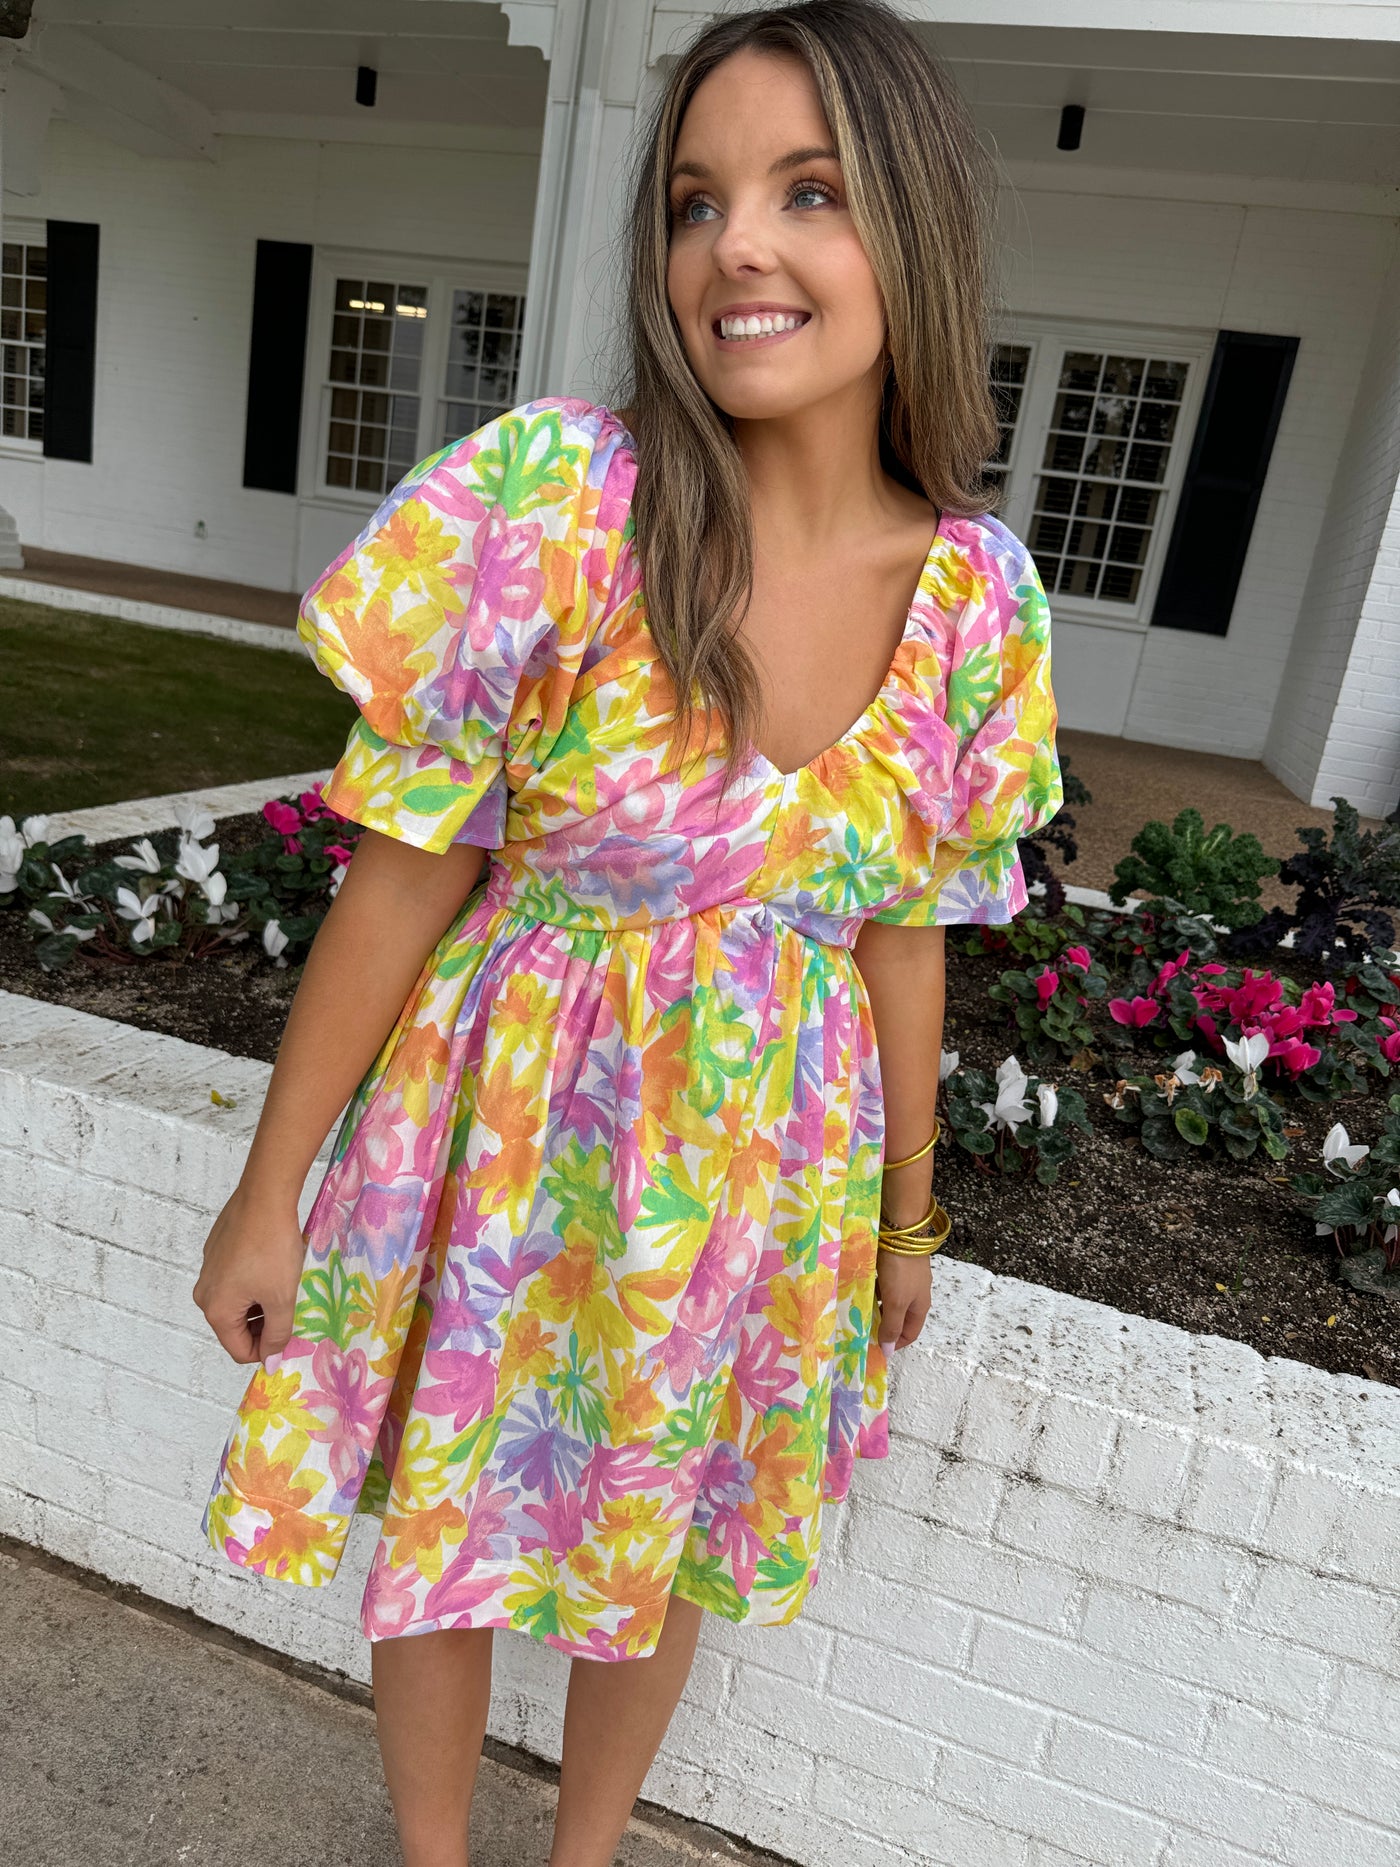 The Denise Sweetheart Floral Dress